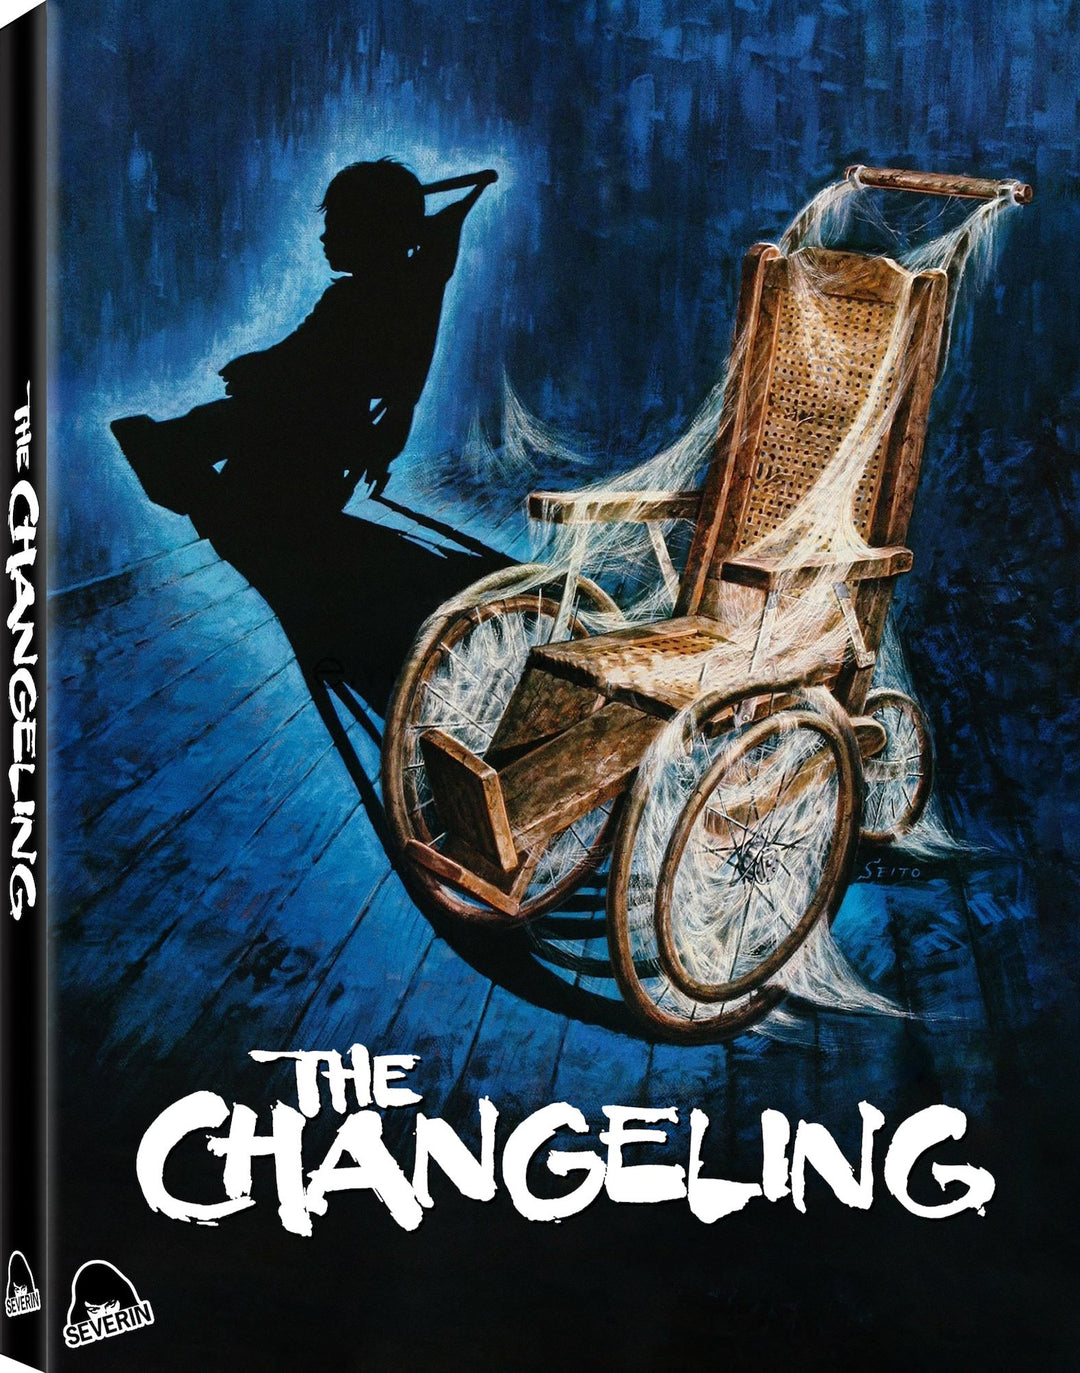 The Changeling [2-Disc Blu-ray w/Slipcover]